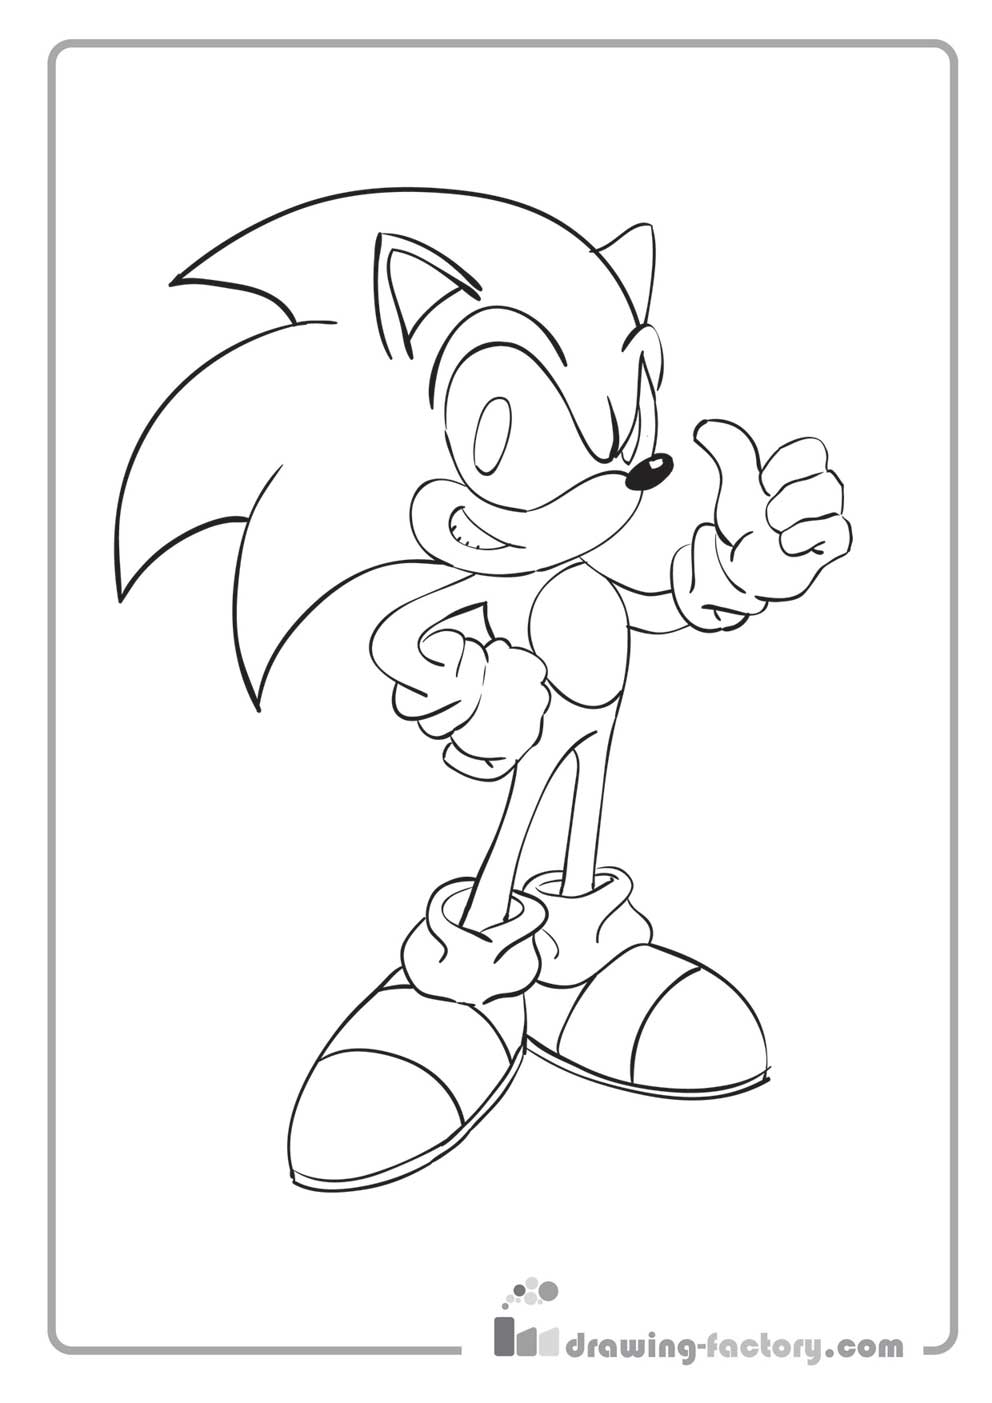 cartoon-coloring-pages-to-print-cartoon-coloring-pages